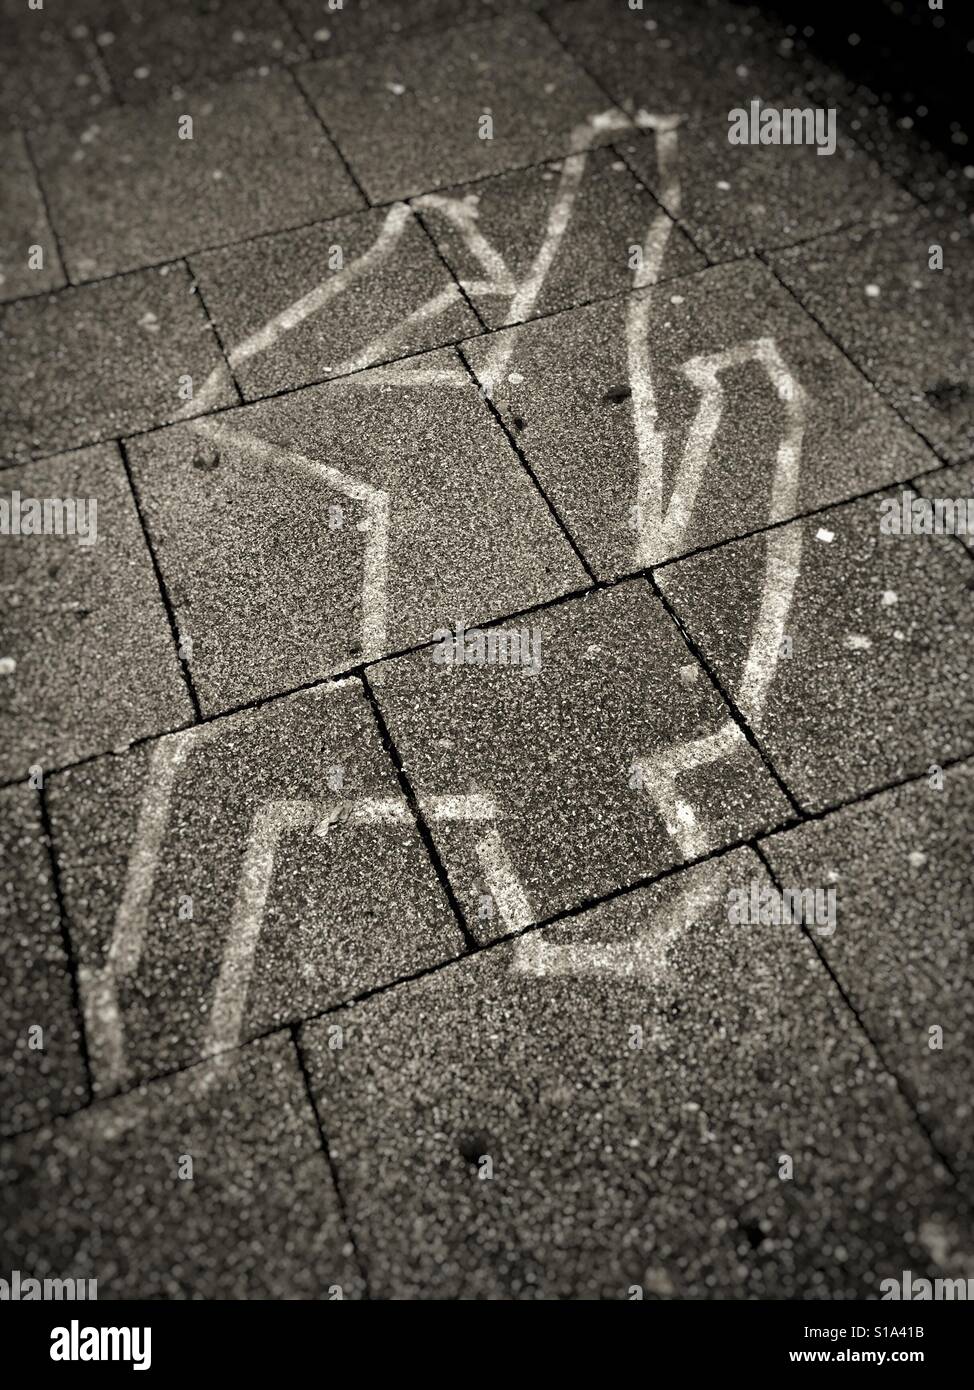 chalk-outline-of-body-on-the-pavement-S1A41B.jpg